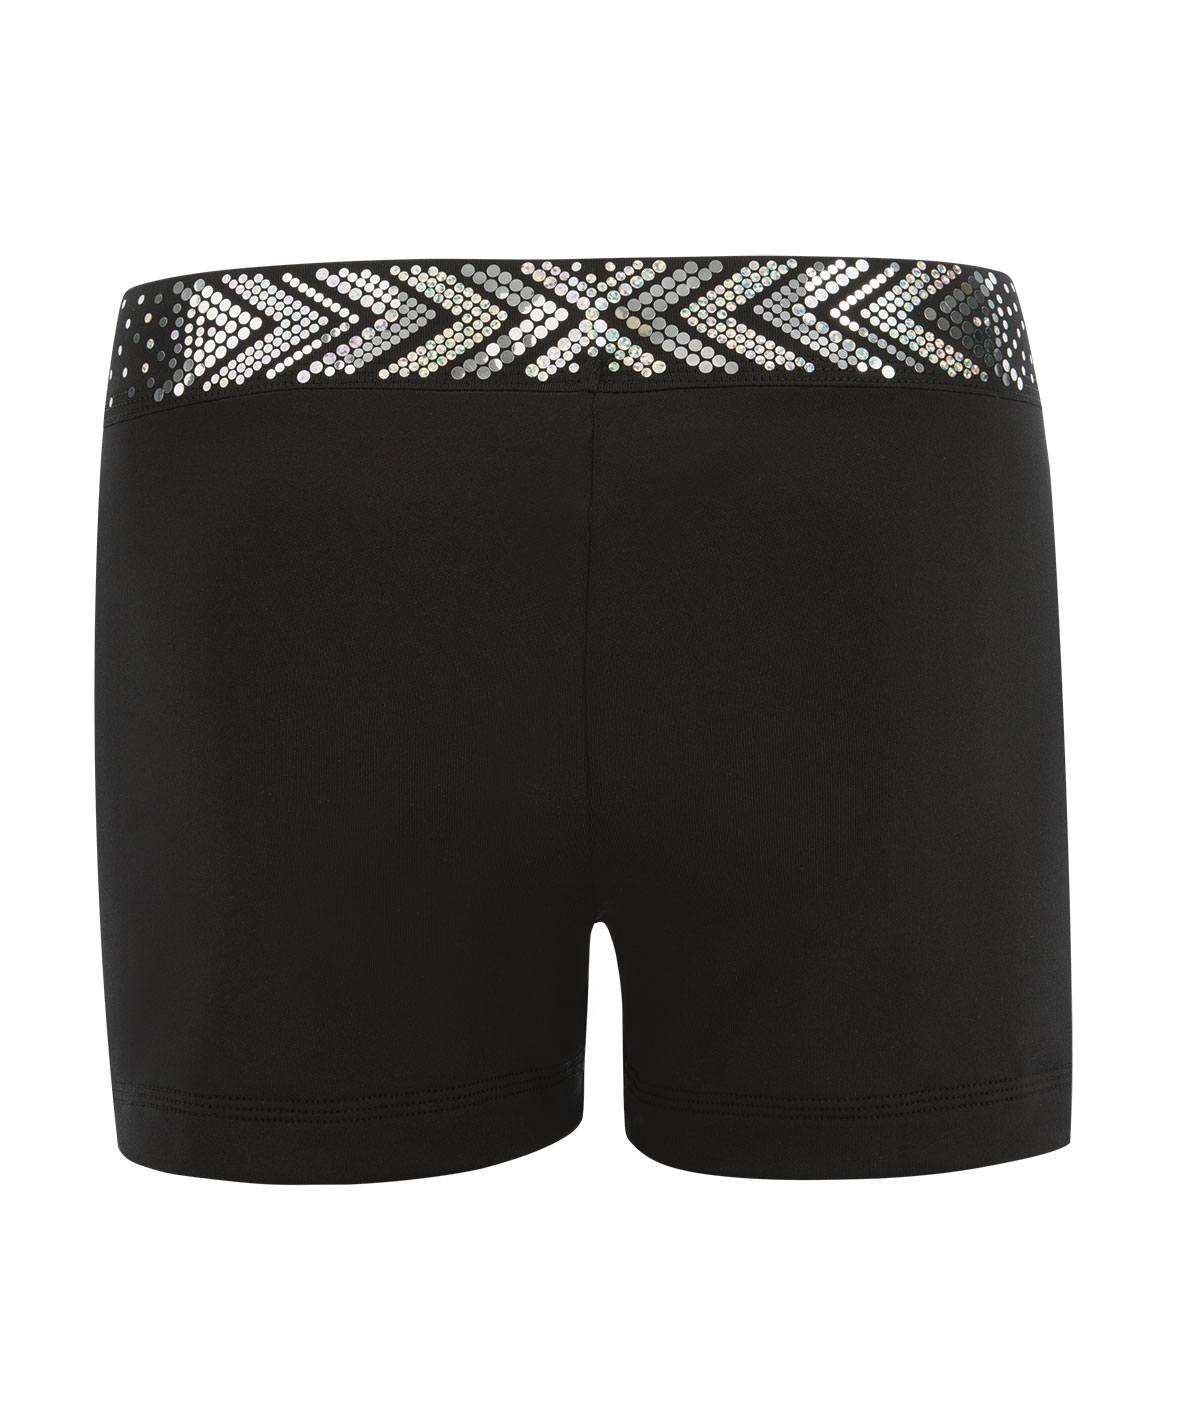 Black Cheer Shorts with Silver Spanglez Waistband - Practice Wear ...